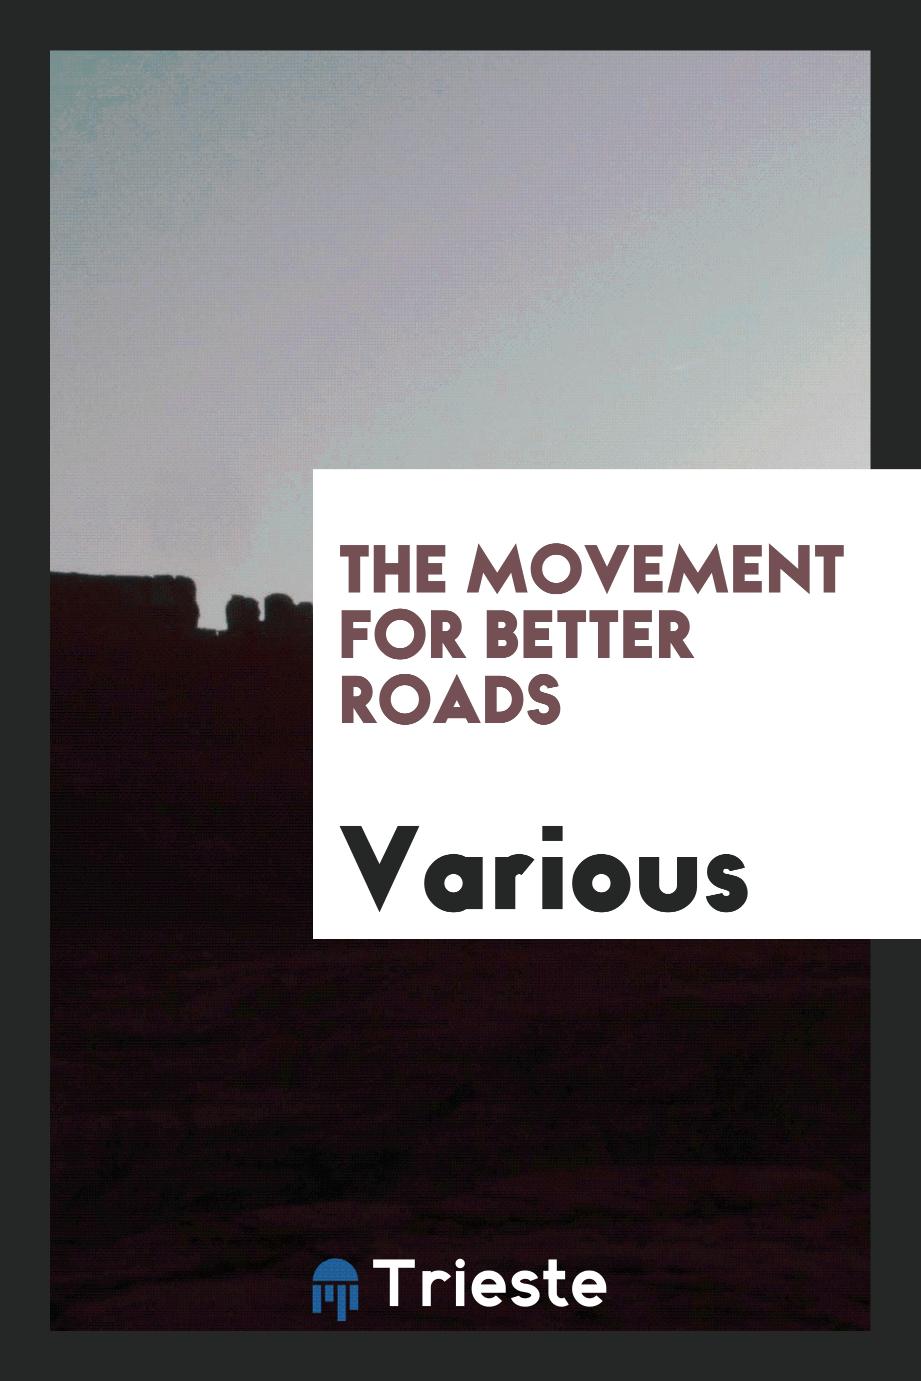 The movement for better roads